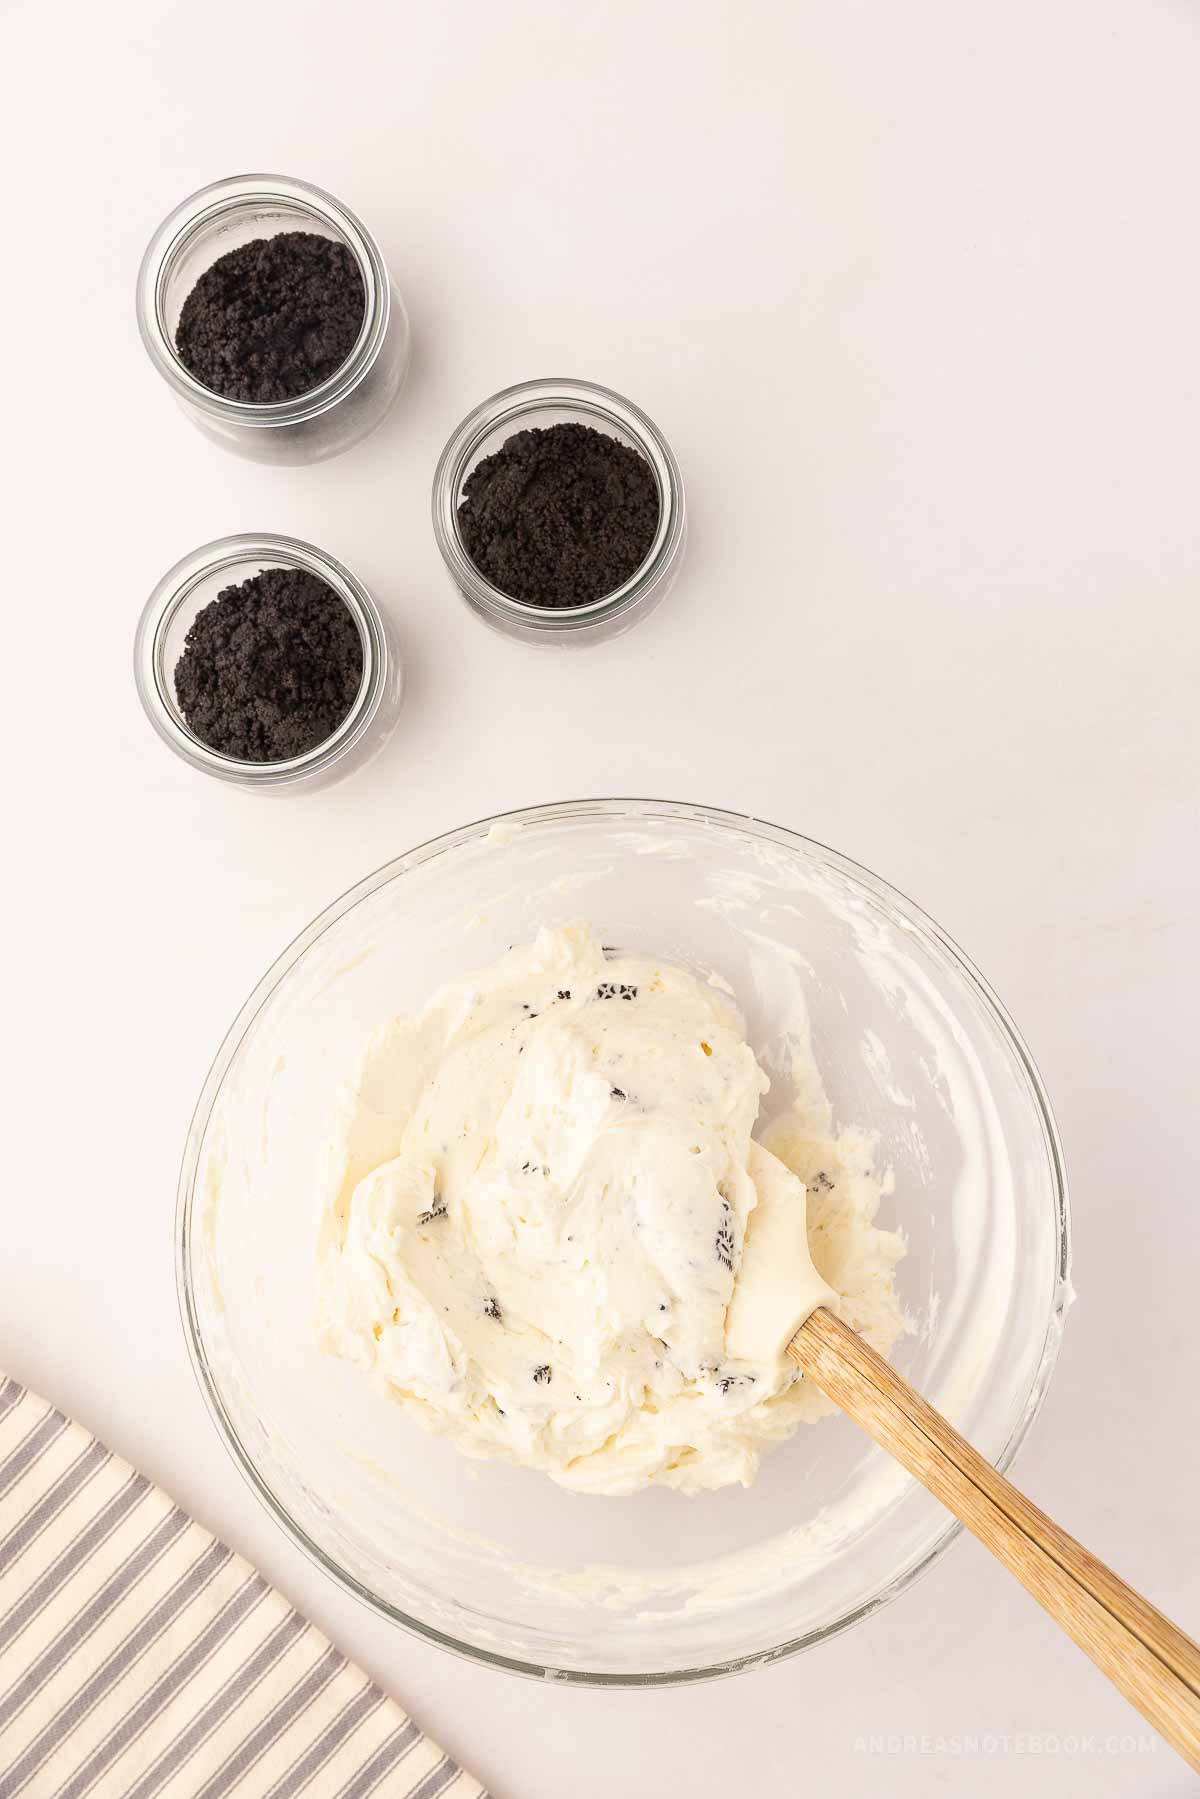 Whipped cream, cream cheese mixture and oreo crumbles in a bowl.